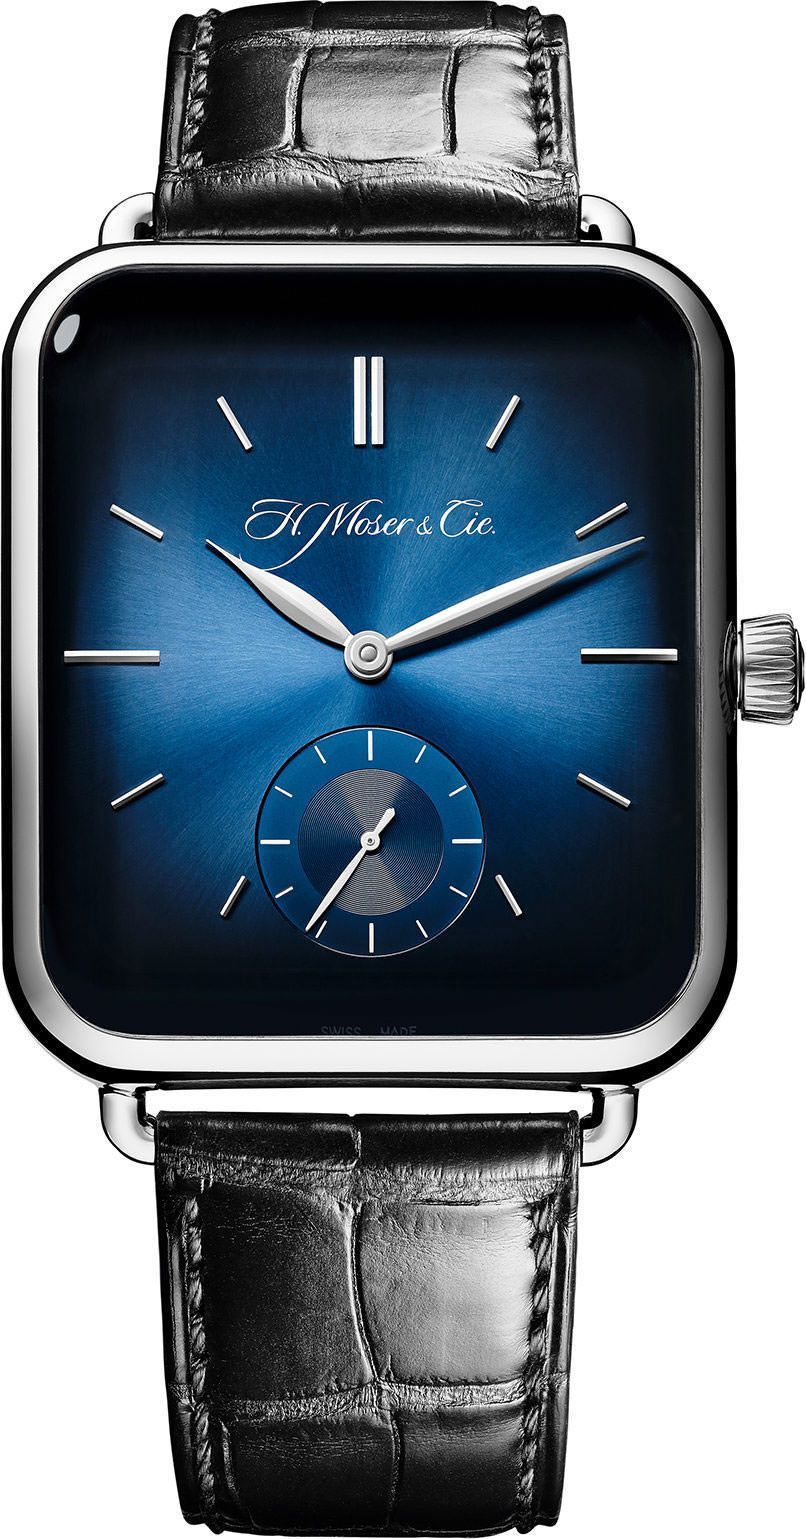 H. Moser & Cie. Swiss Alp Watch Small Seconds Blue Dial 38.2 mm Automatic Watch For Men - 1